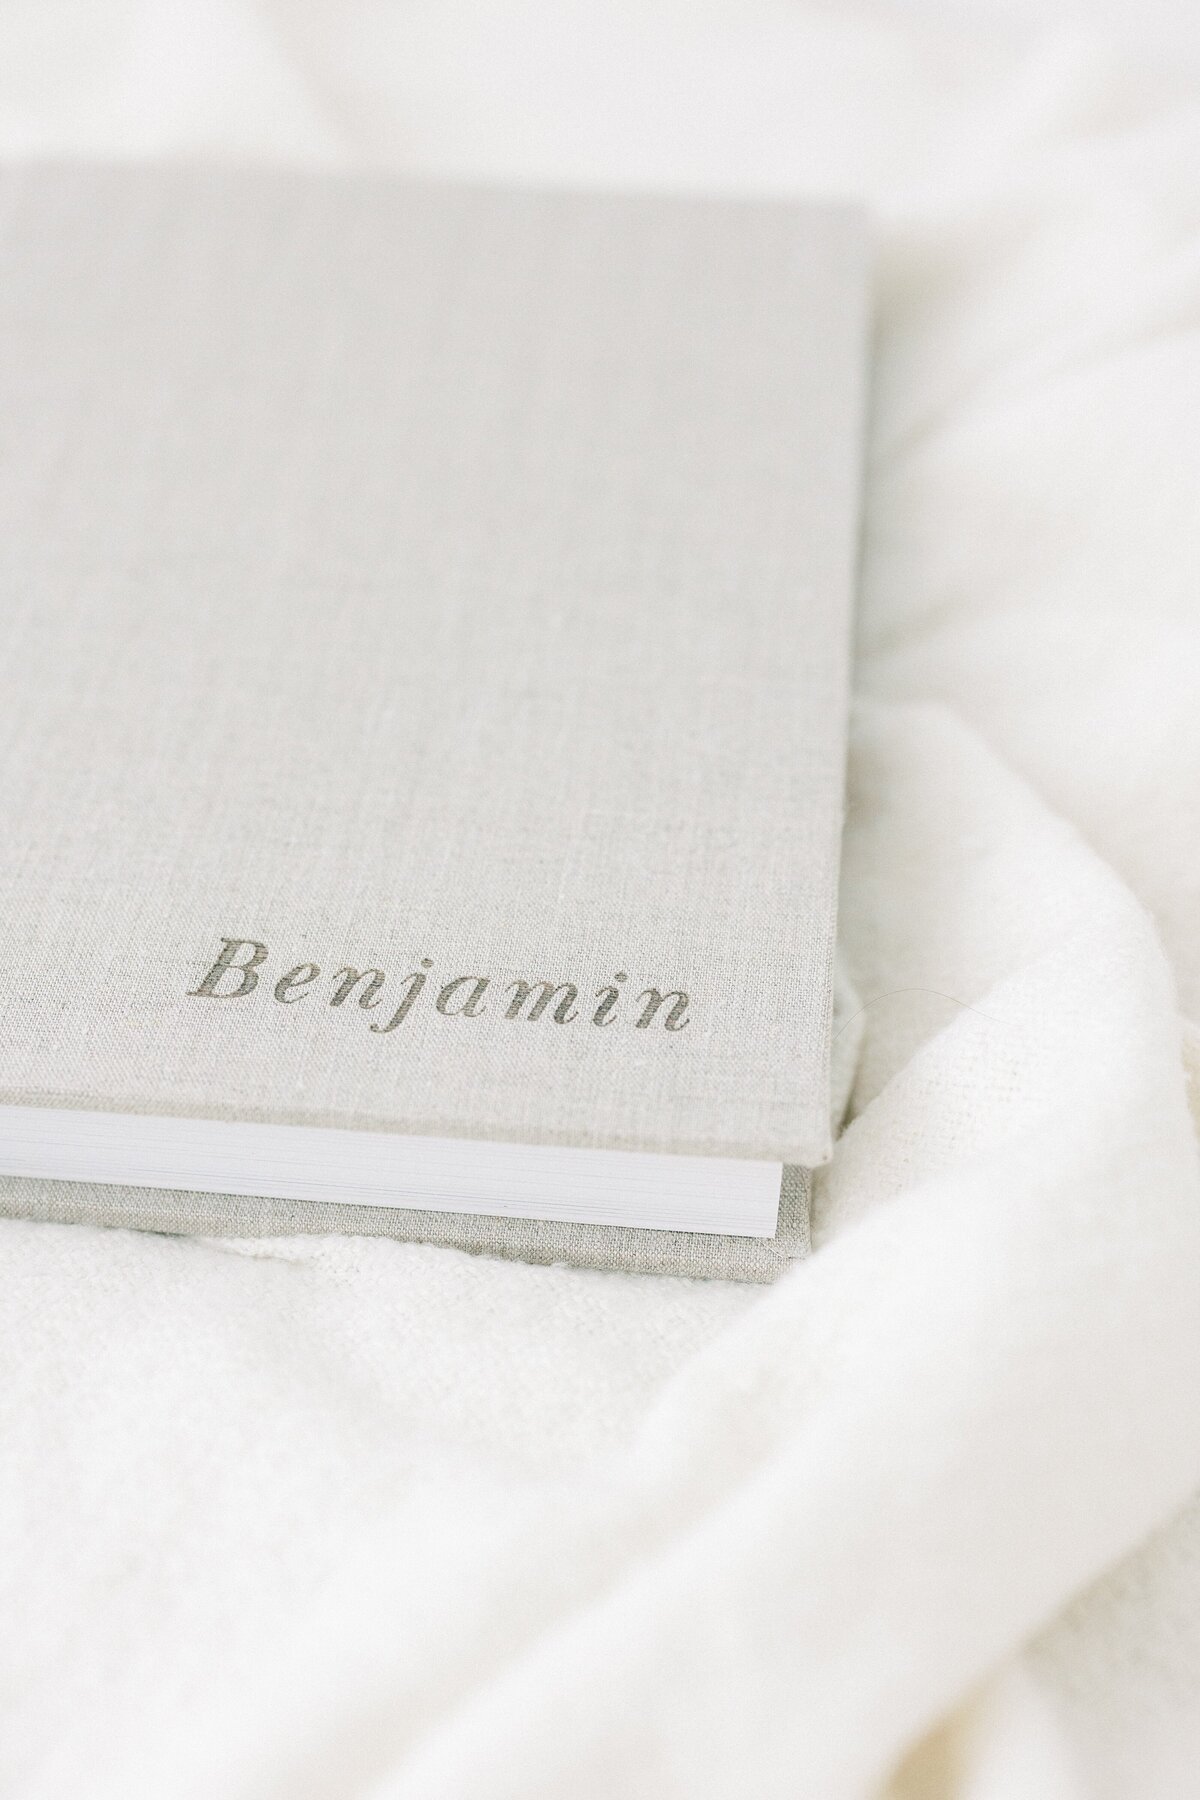 Redtree customized grey heirloom album with name benjamin on front cover